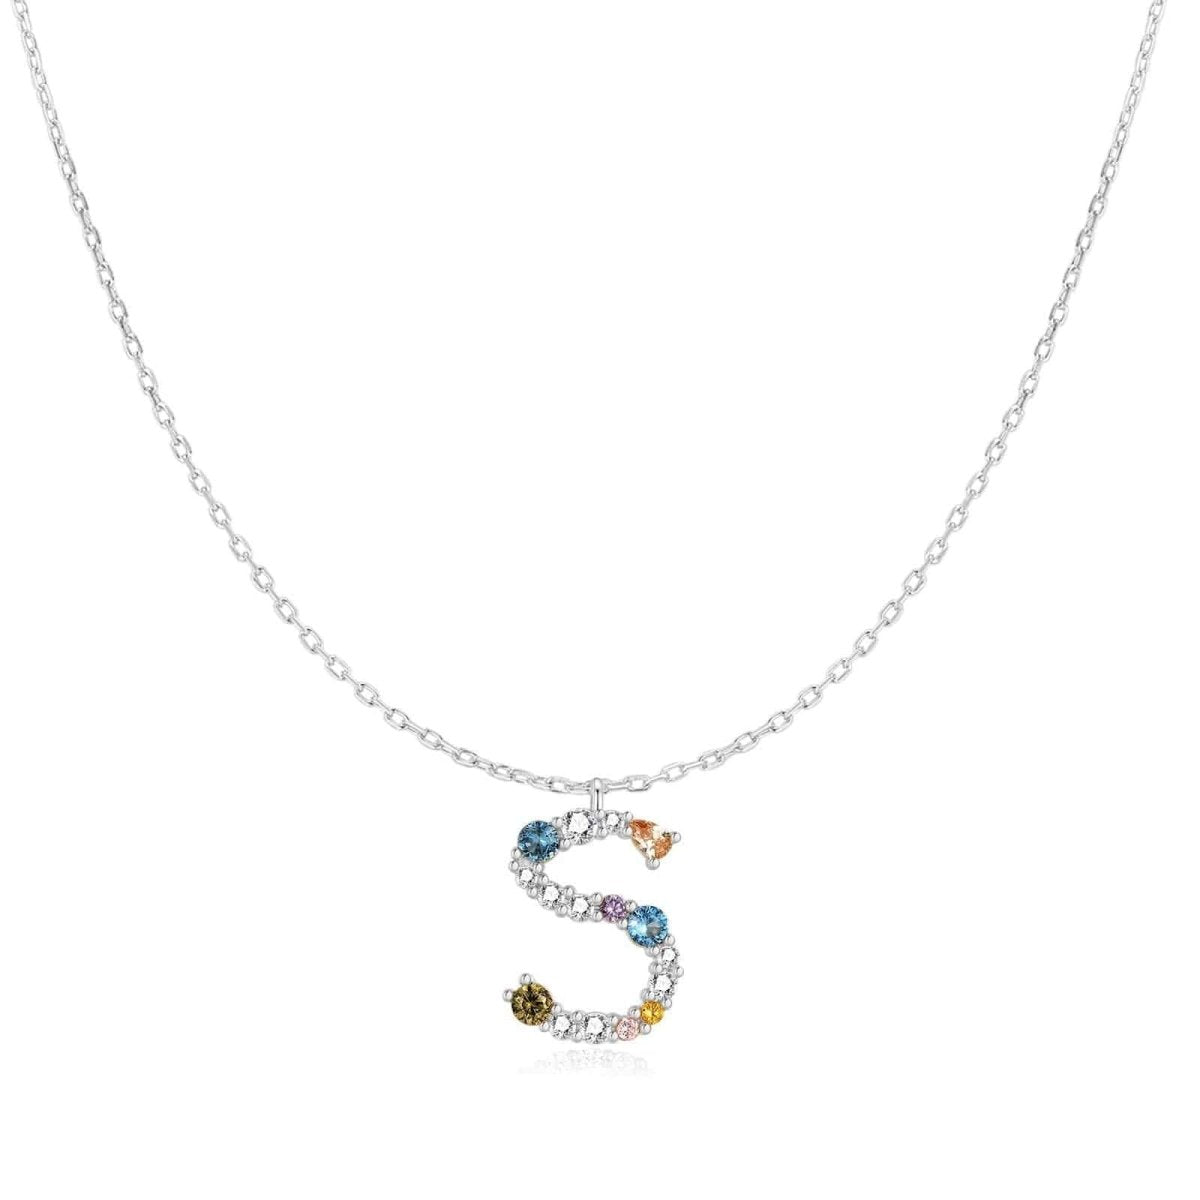 "My Initial" Necklace - Milas Jewels Shop